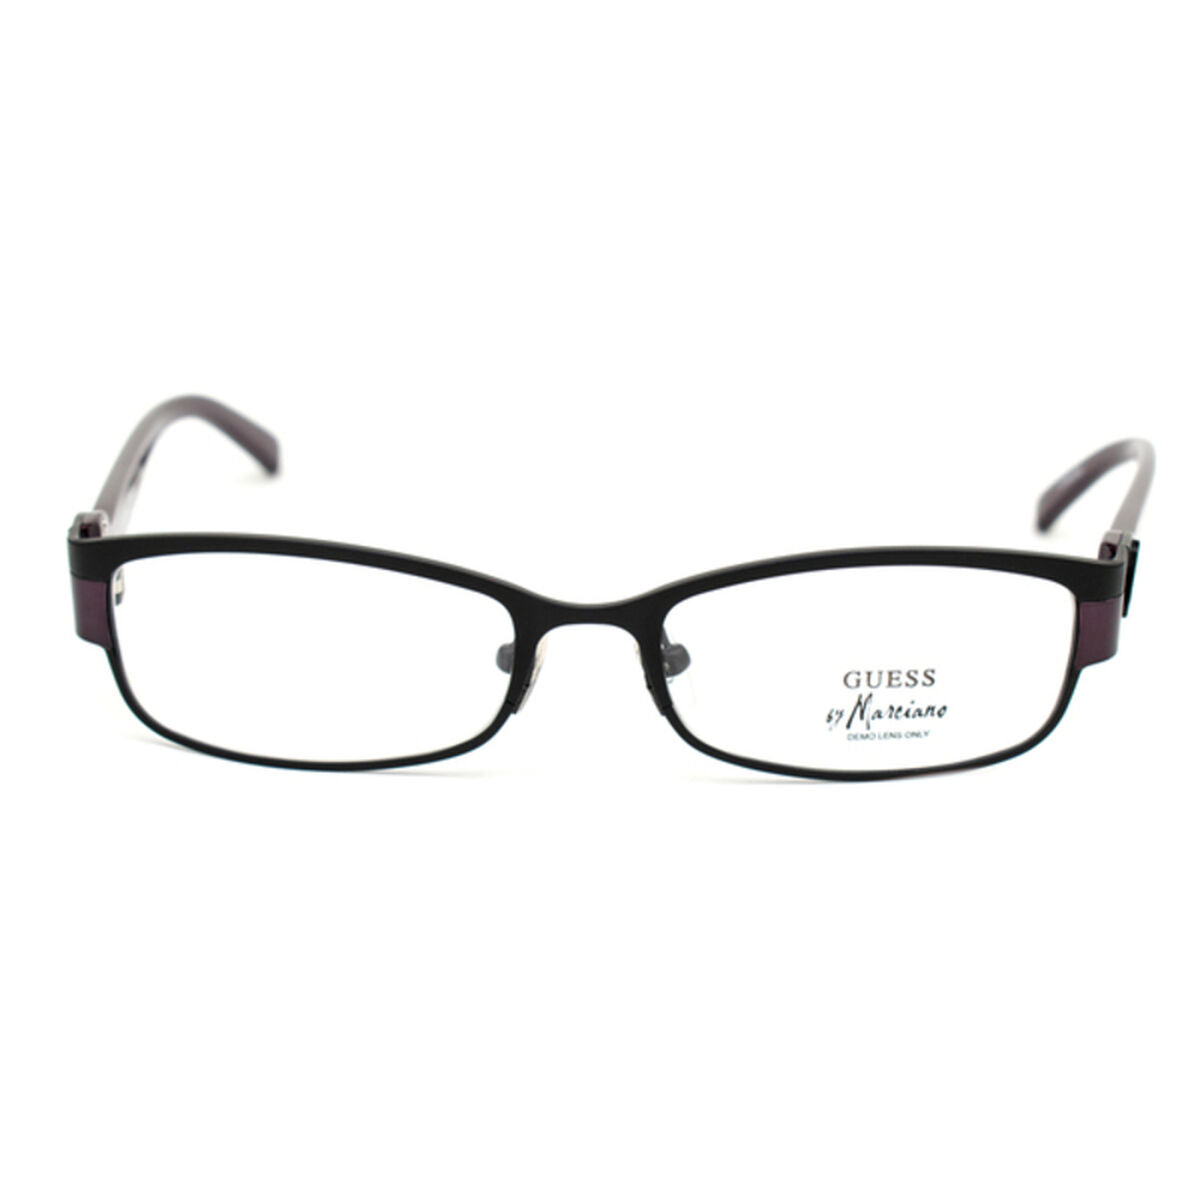 Ladies' Spectacle frame Guess Marciano GM111-BLACK